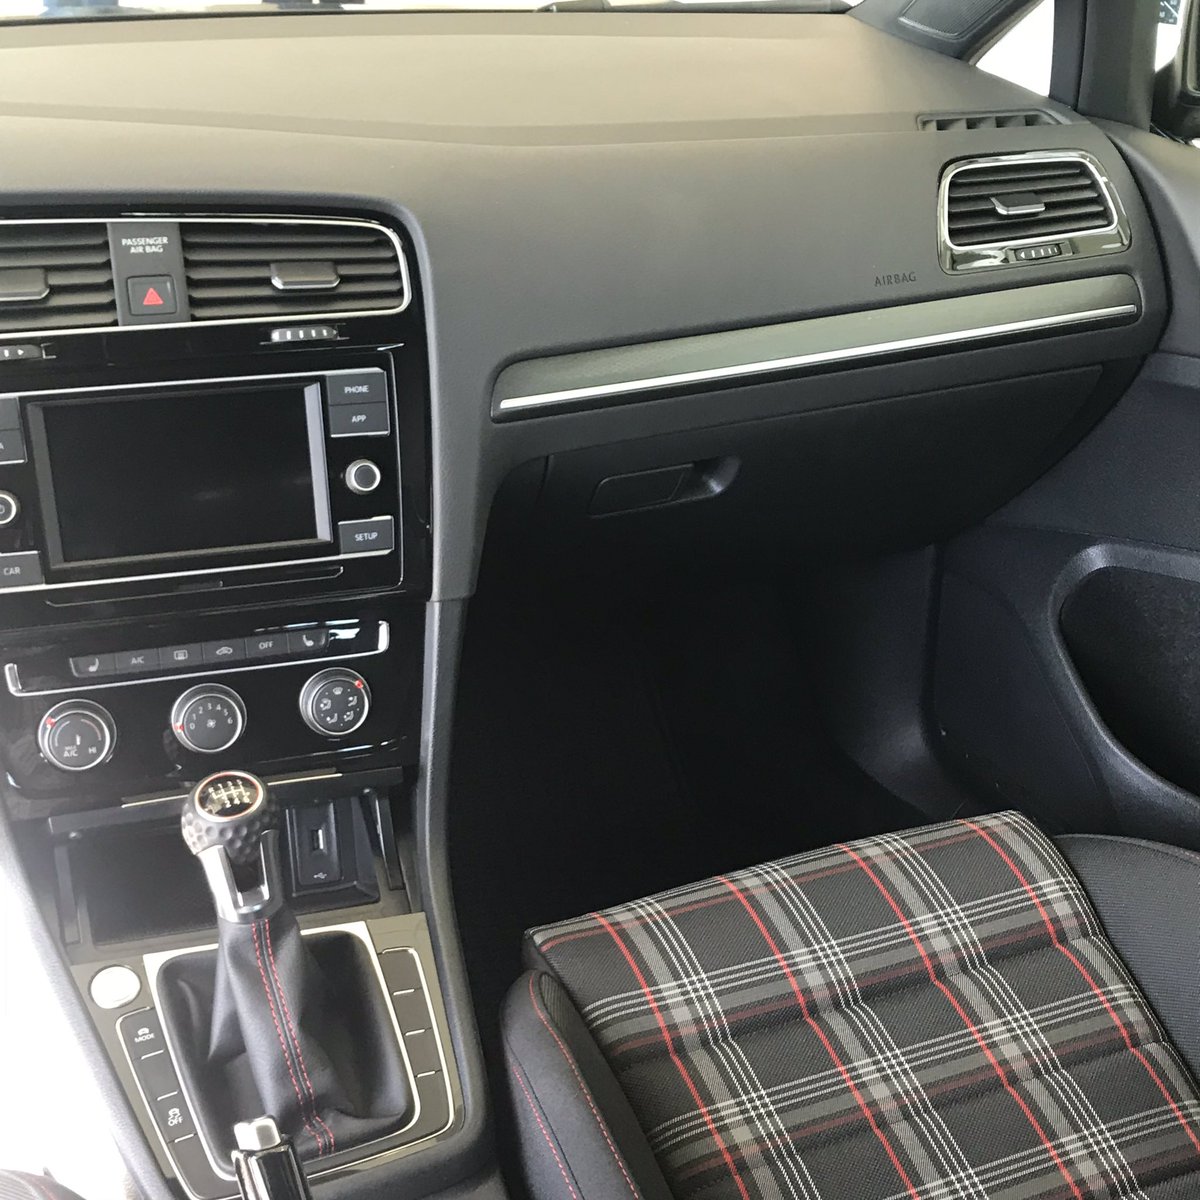 Cira Auto On Twitter The Plaid Interior Of The Vw Gti